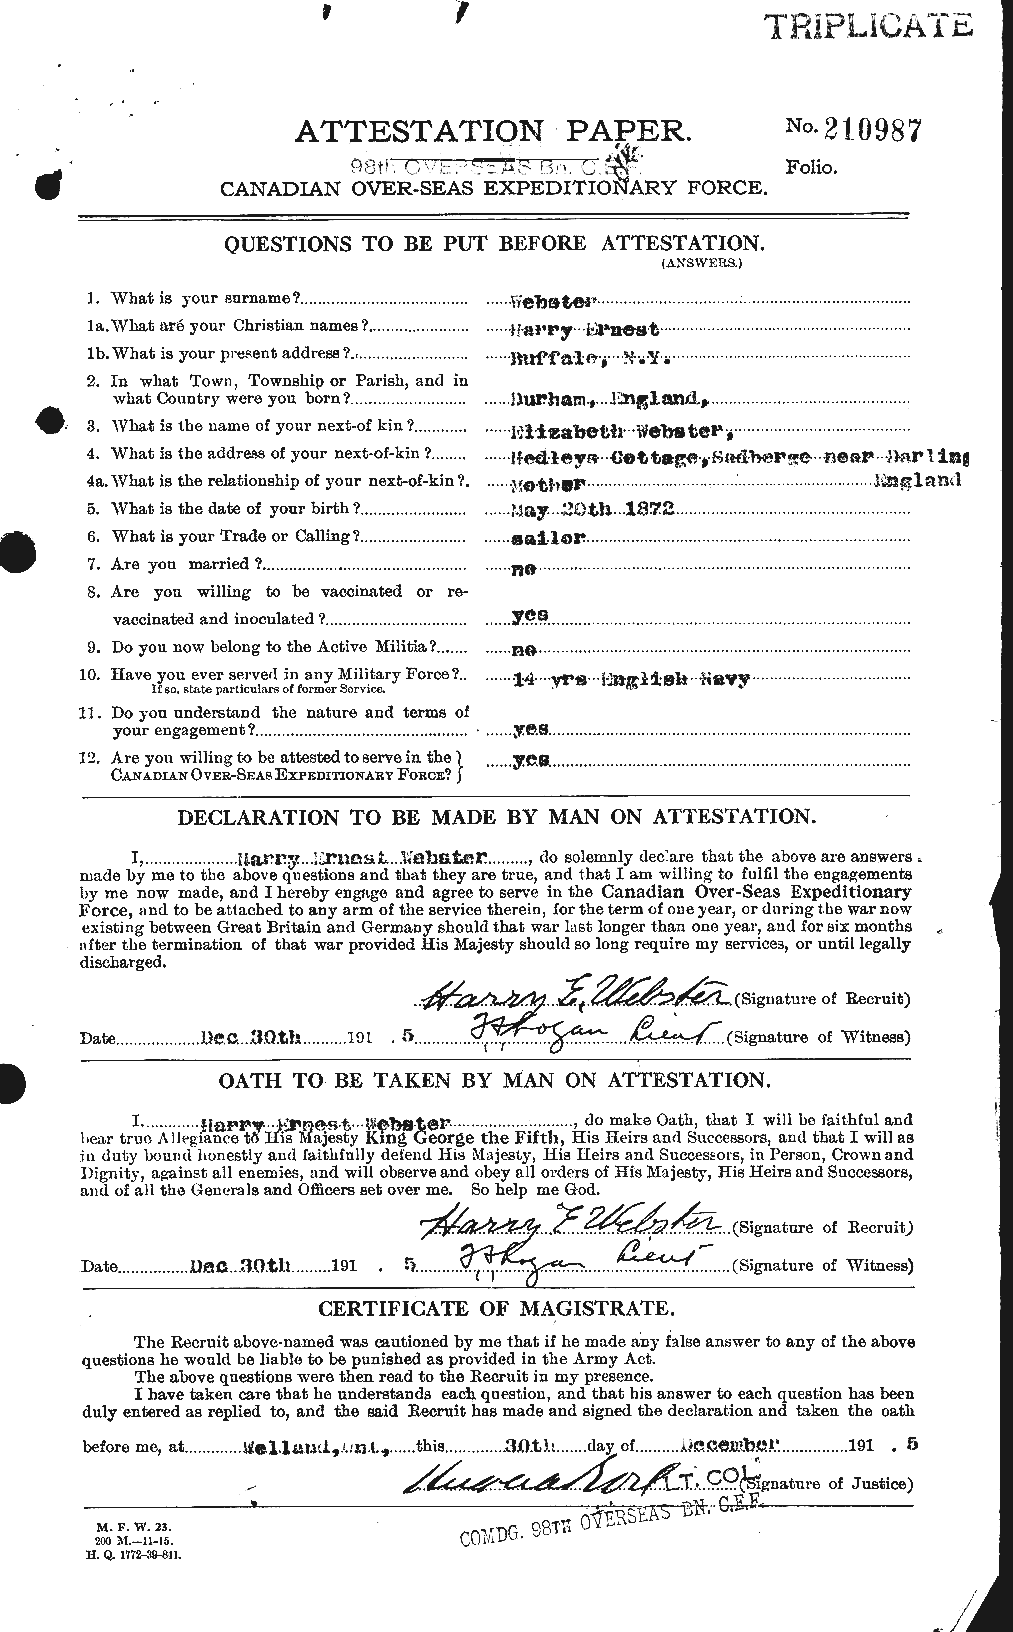 Personnel Records of the First World War - CEF 670420a